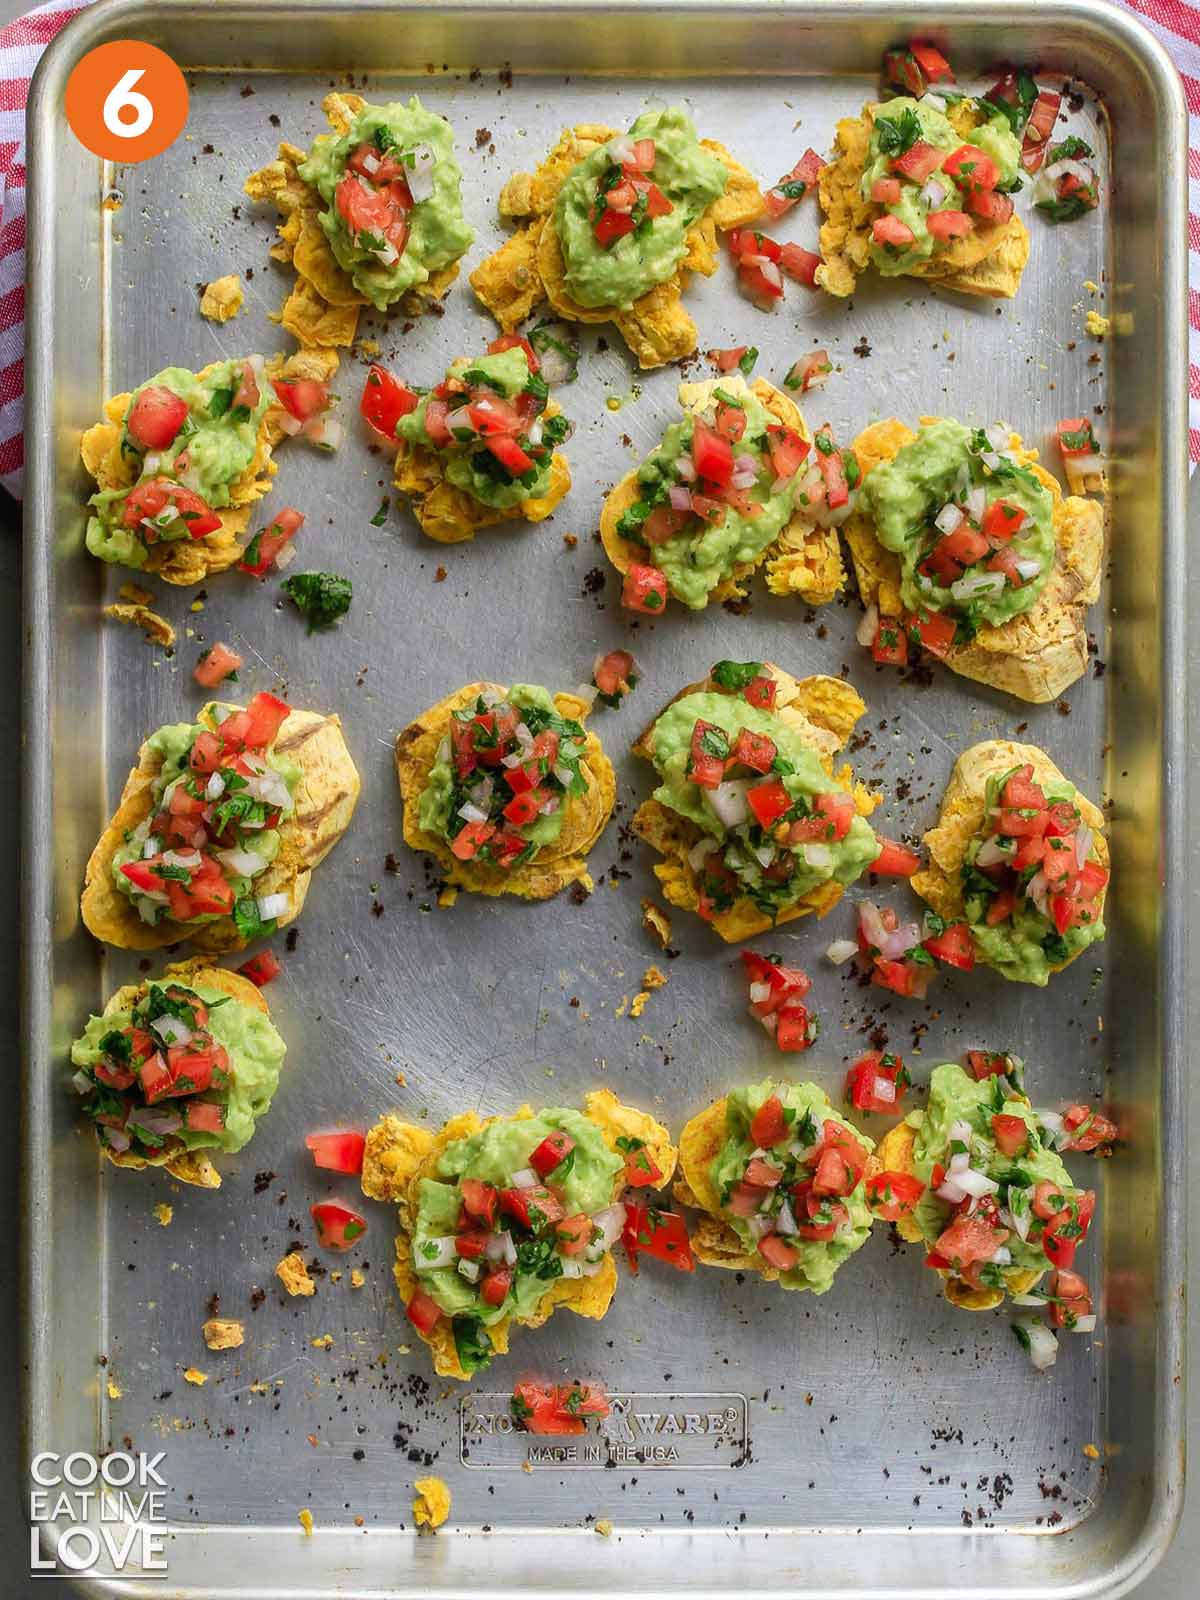 Baked tostones are topped and ready to eat on platter.